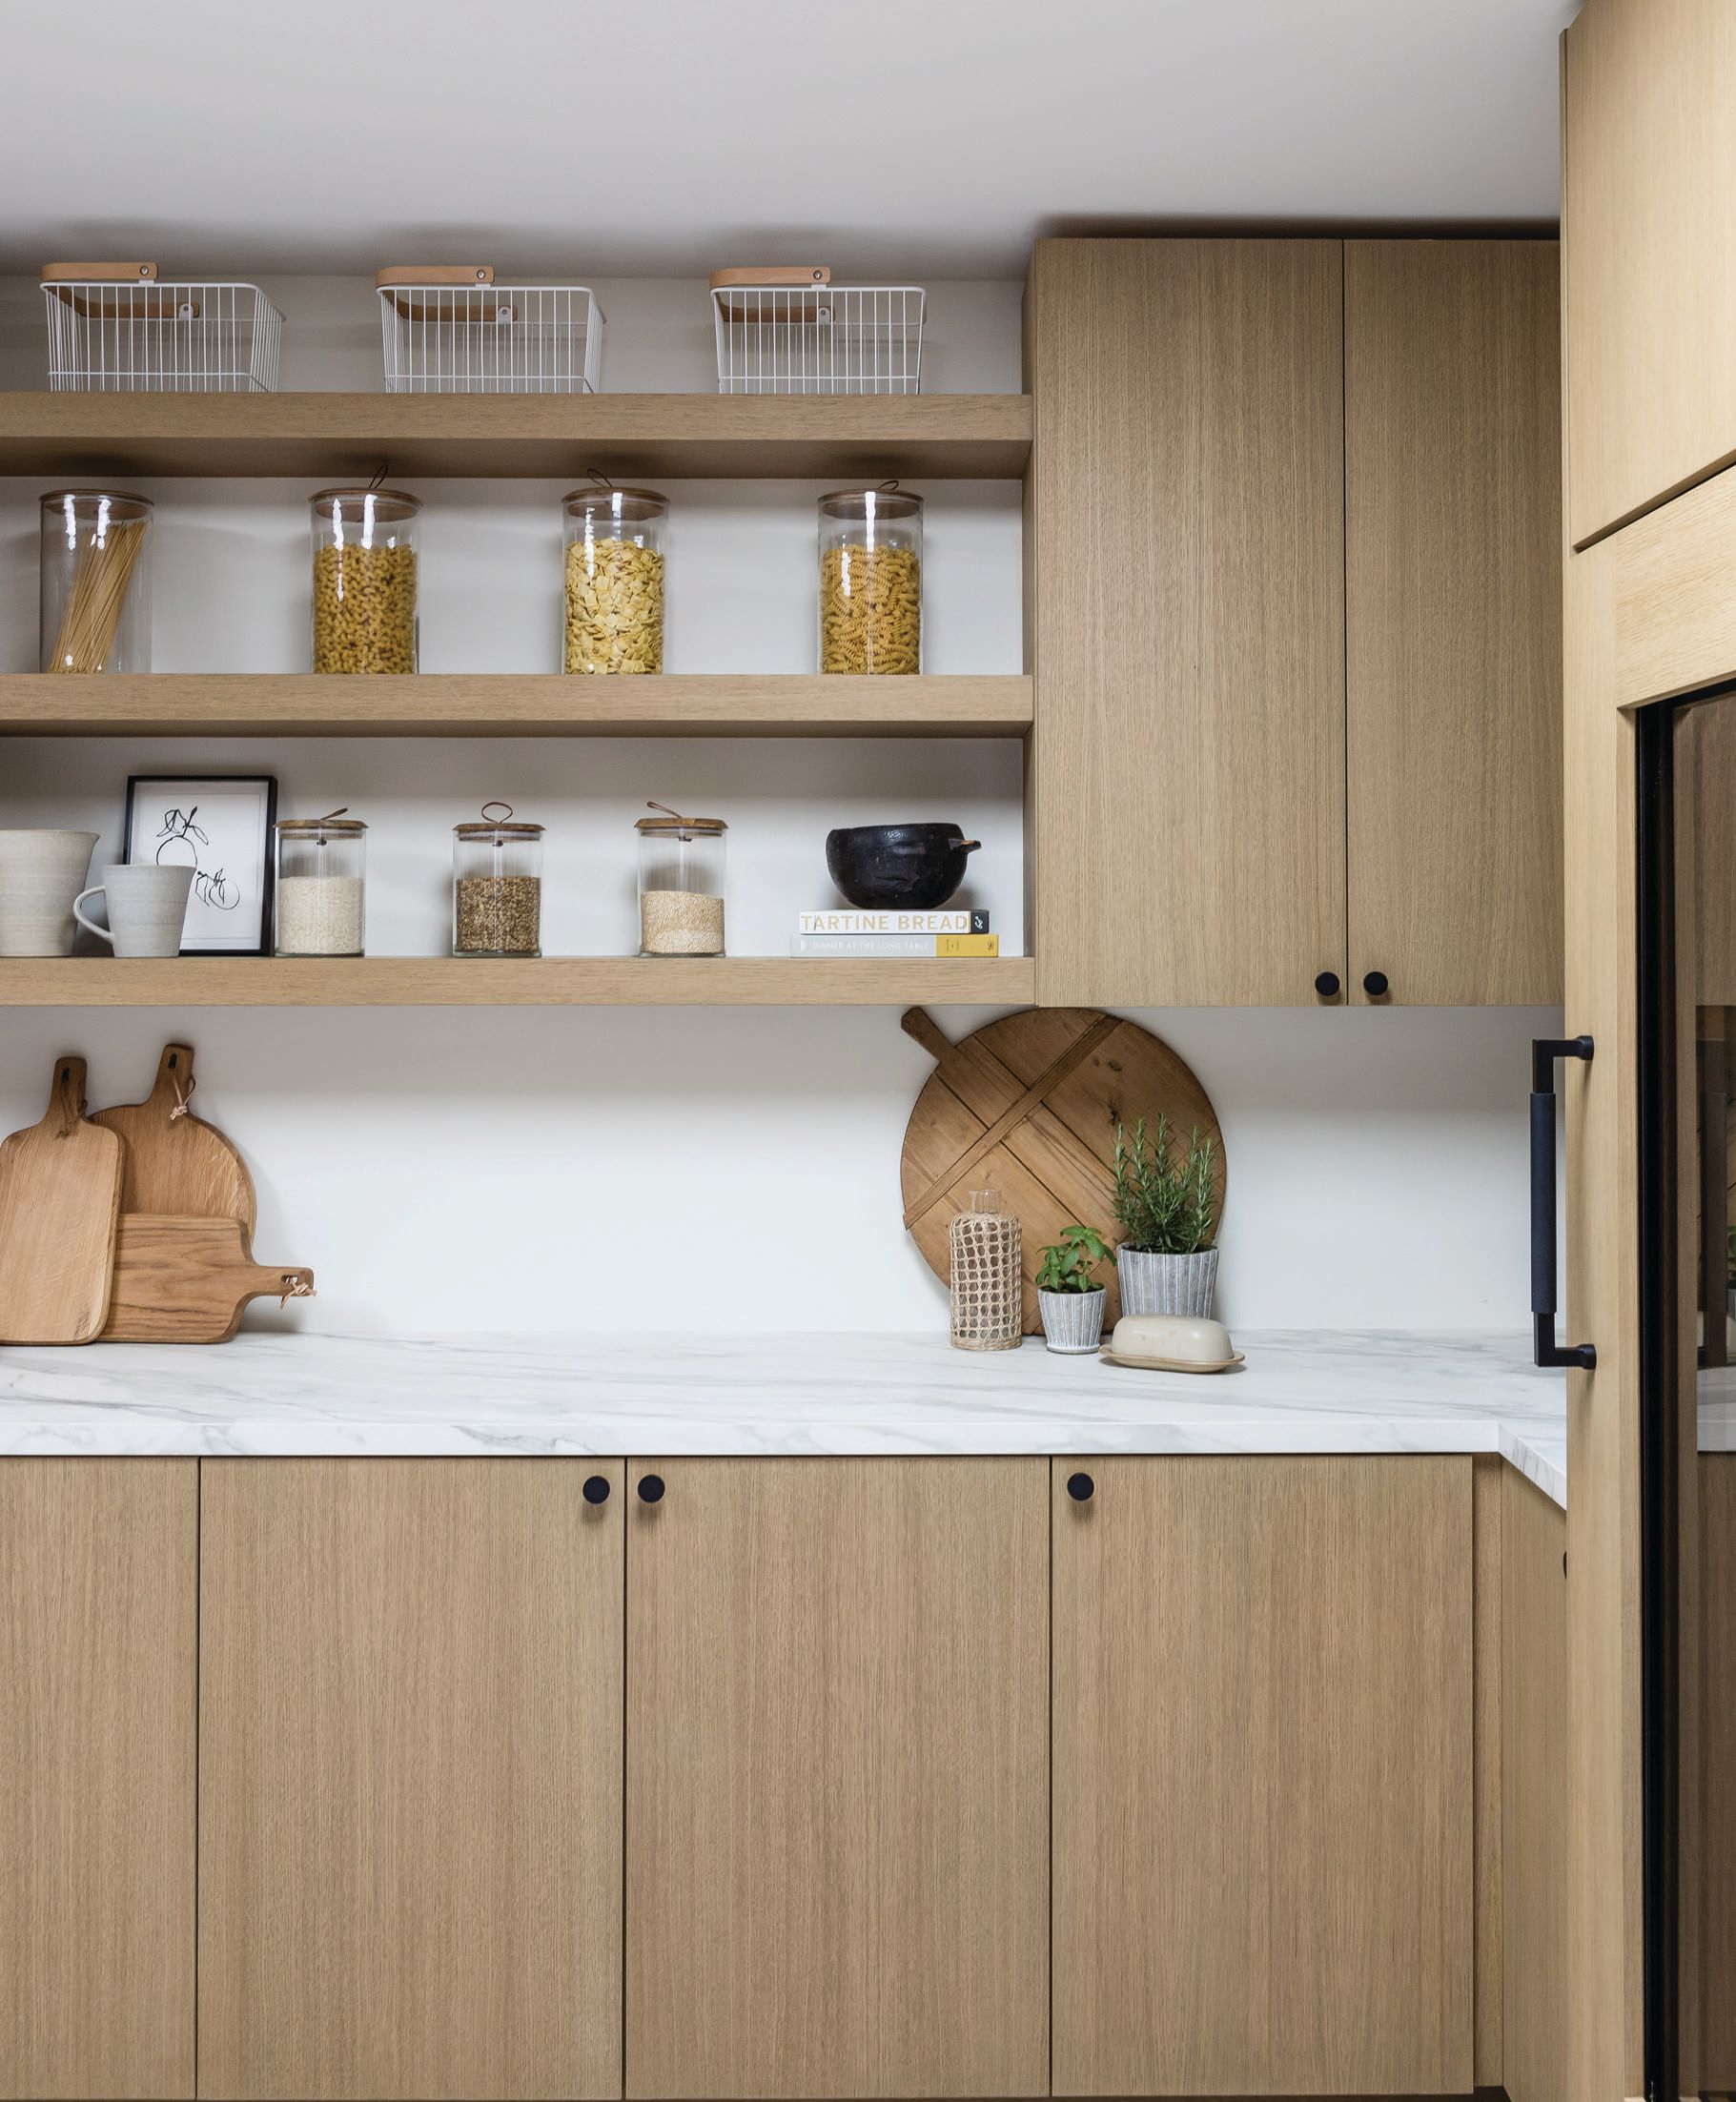 A separate “dirty kitchen” contains a refrigerator and double wall ovens, plus purposefully designed custom cabinetry. PHOTOGRAPHED BY VANESSA LENTINE